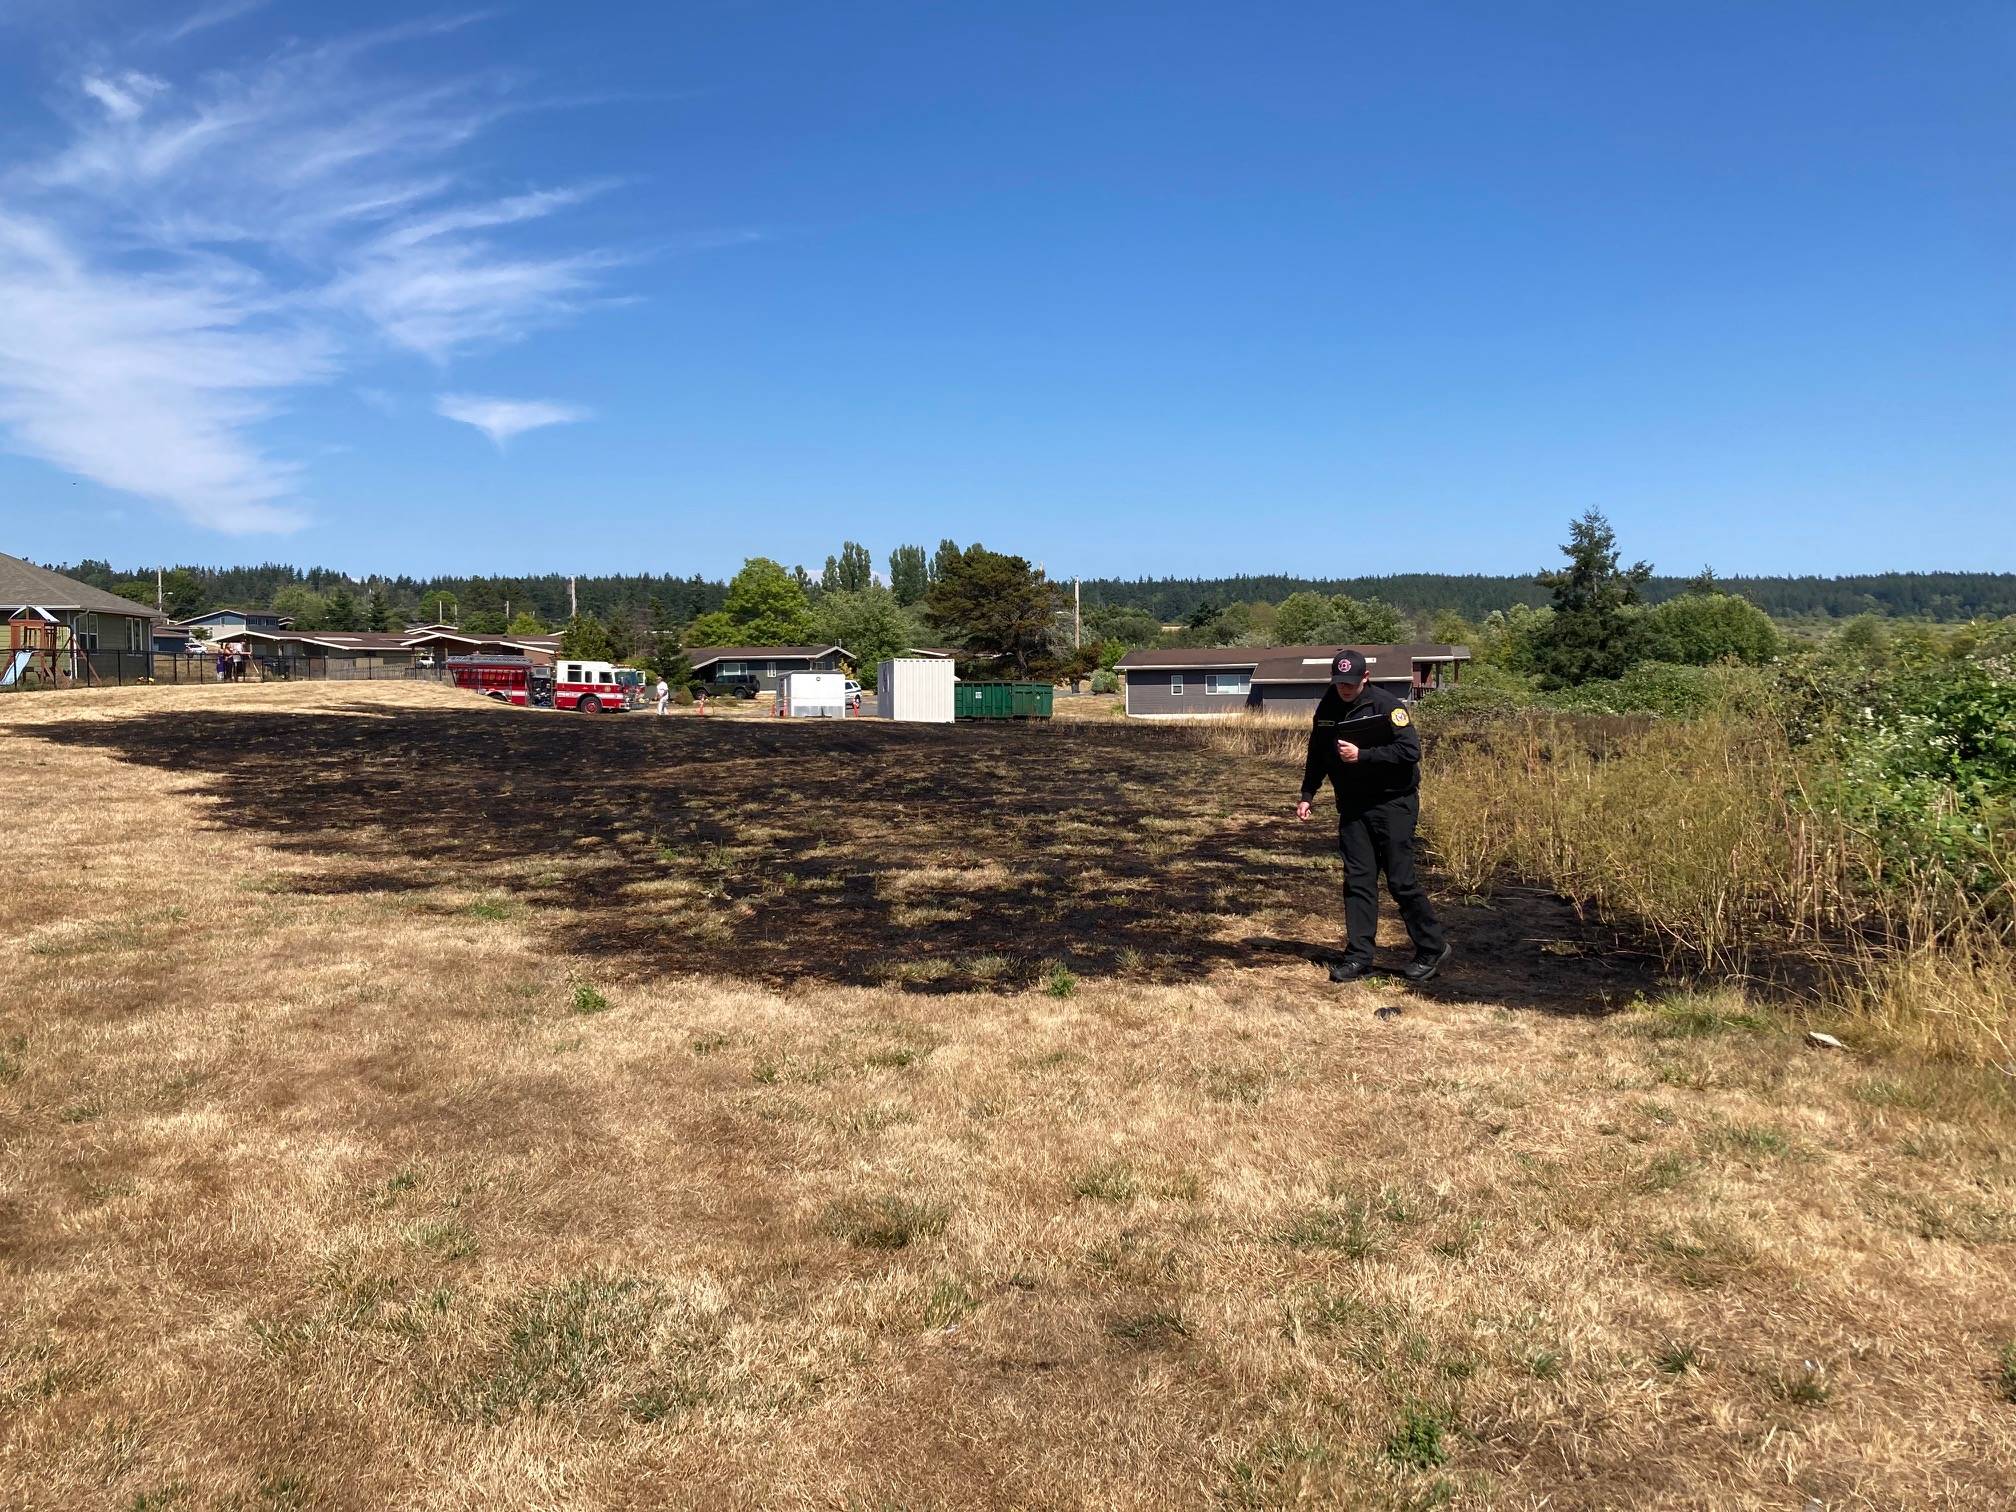 Navy photo
NAS Whidbey Fire Inspector Zach Walker looks at the damage of a small fire at a yard in military housing in Crescent Harbor Tuesday.